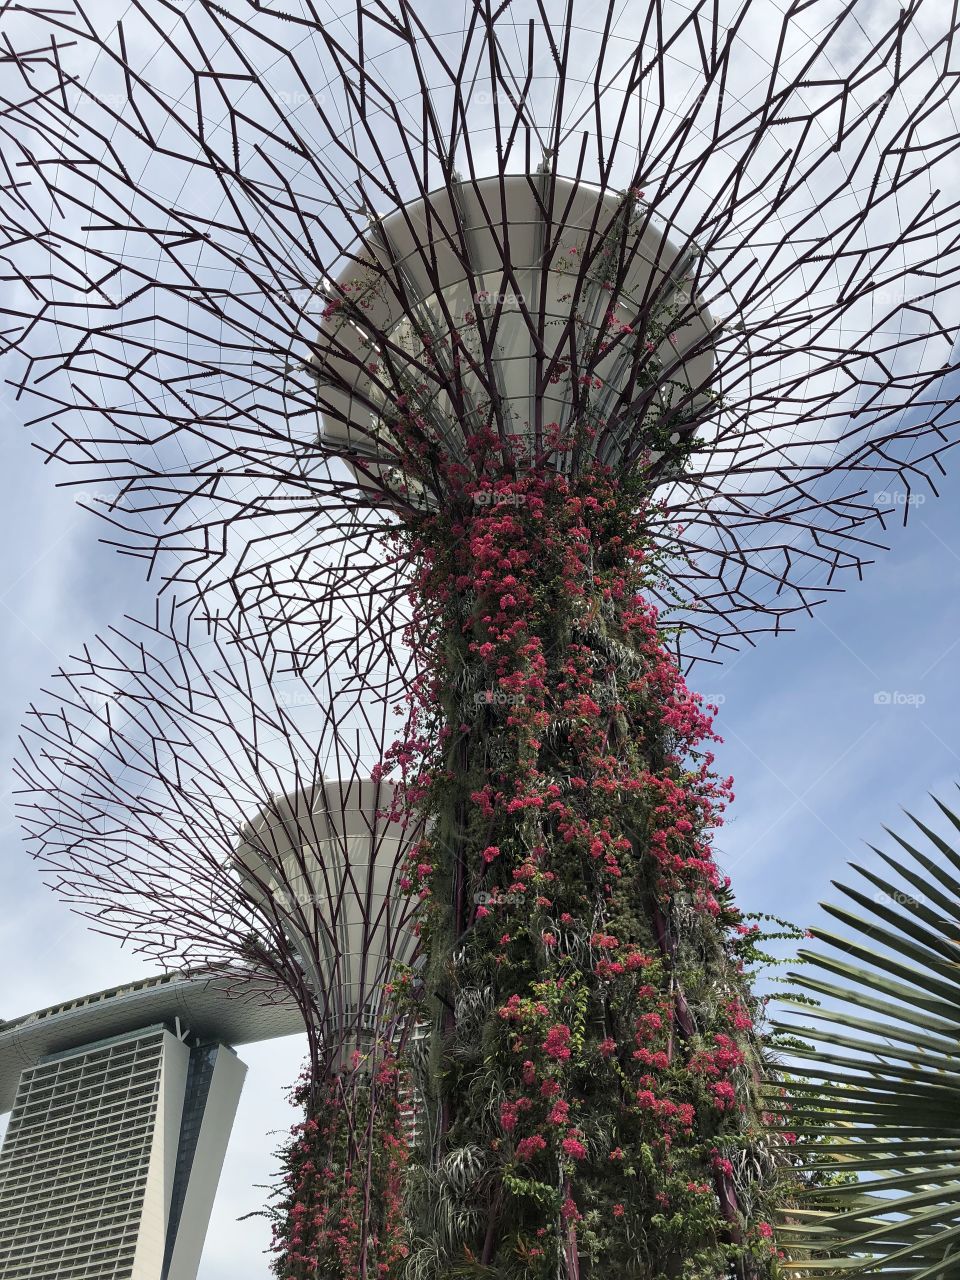 Grove tree at Gardens by the bay 